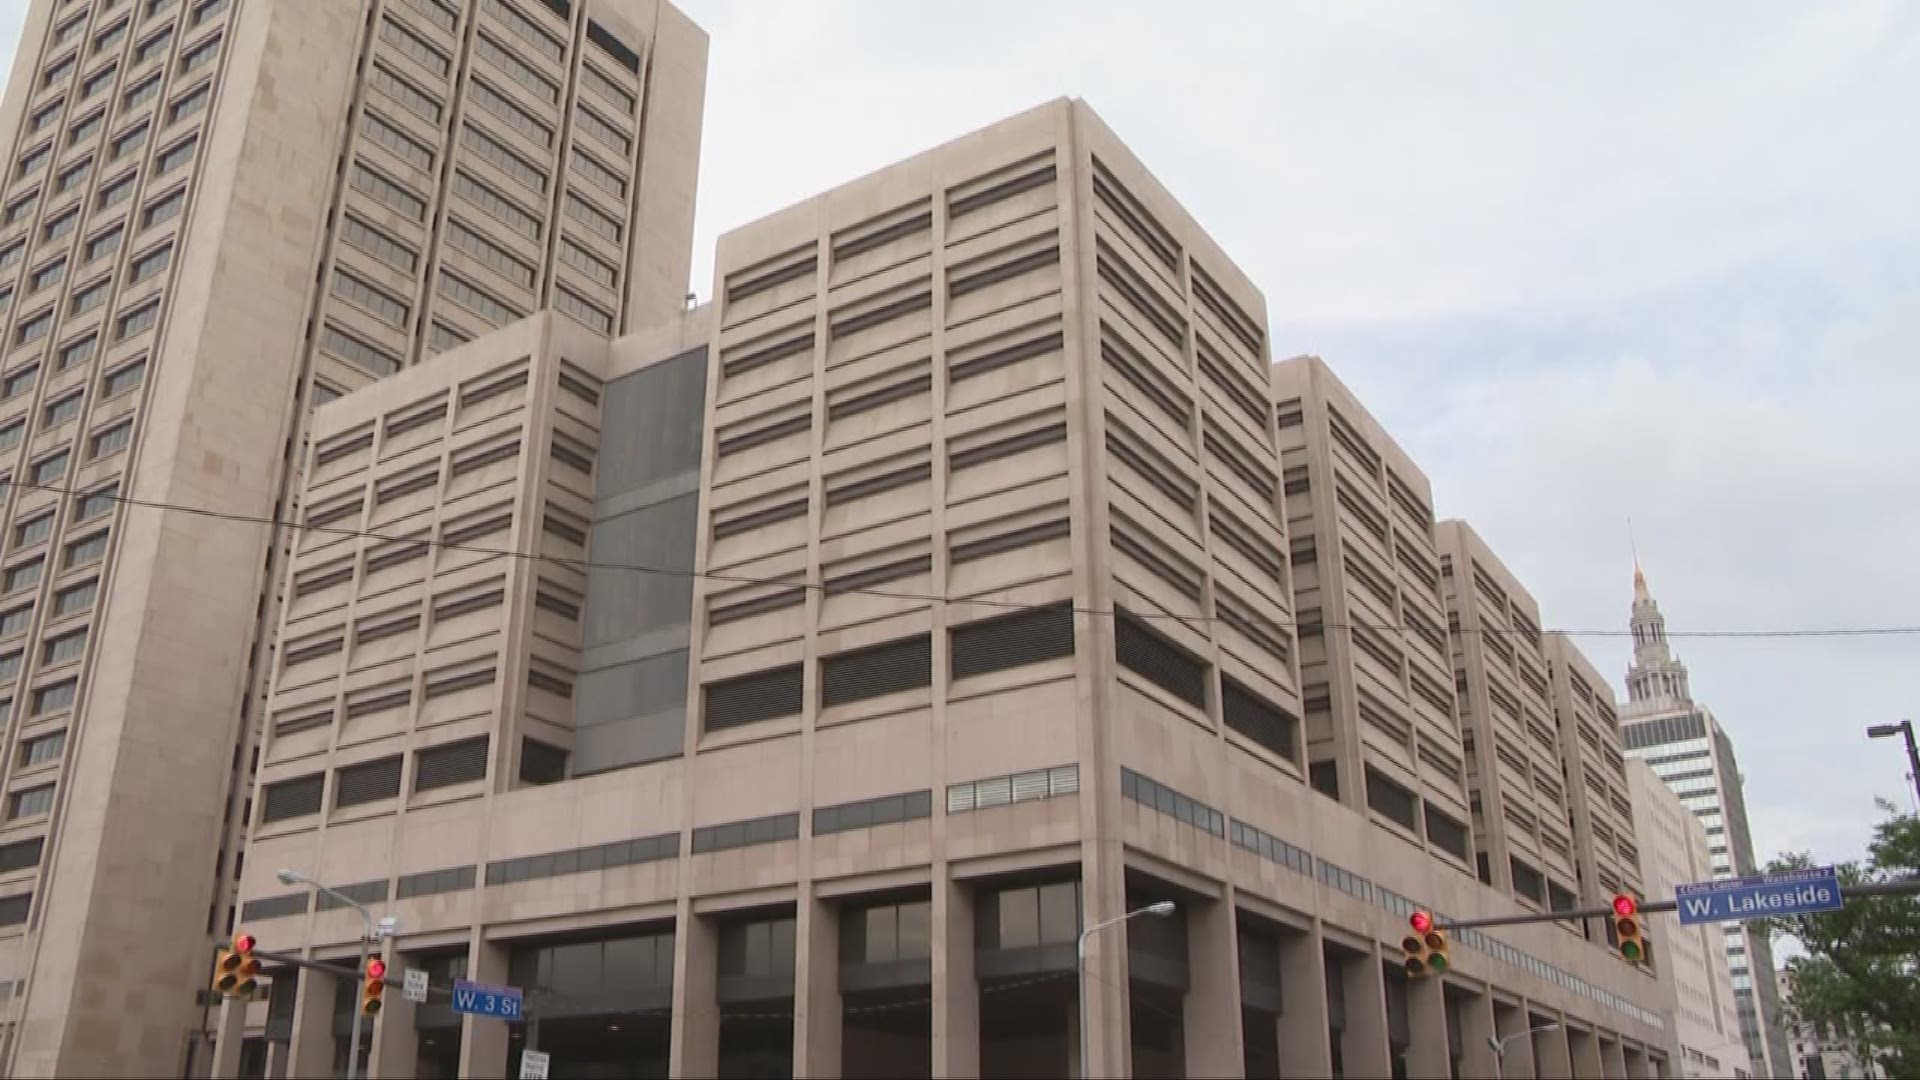 More whistleblowers accuse Cuyahoga County Jail of depriving inmates medical care